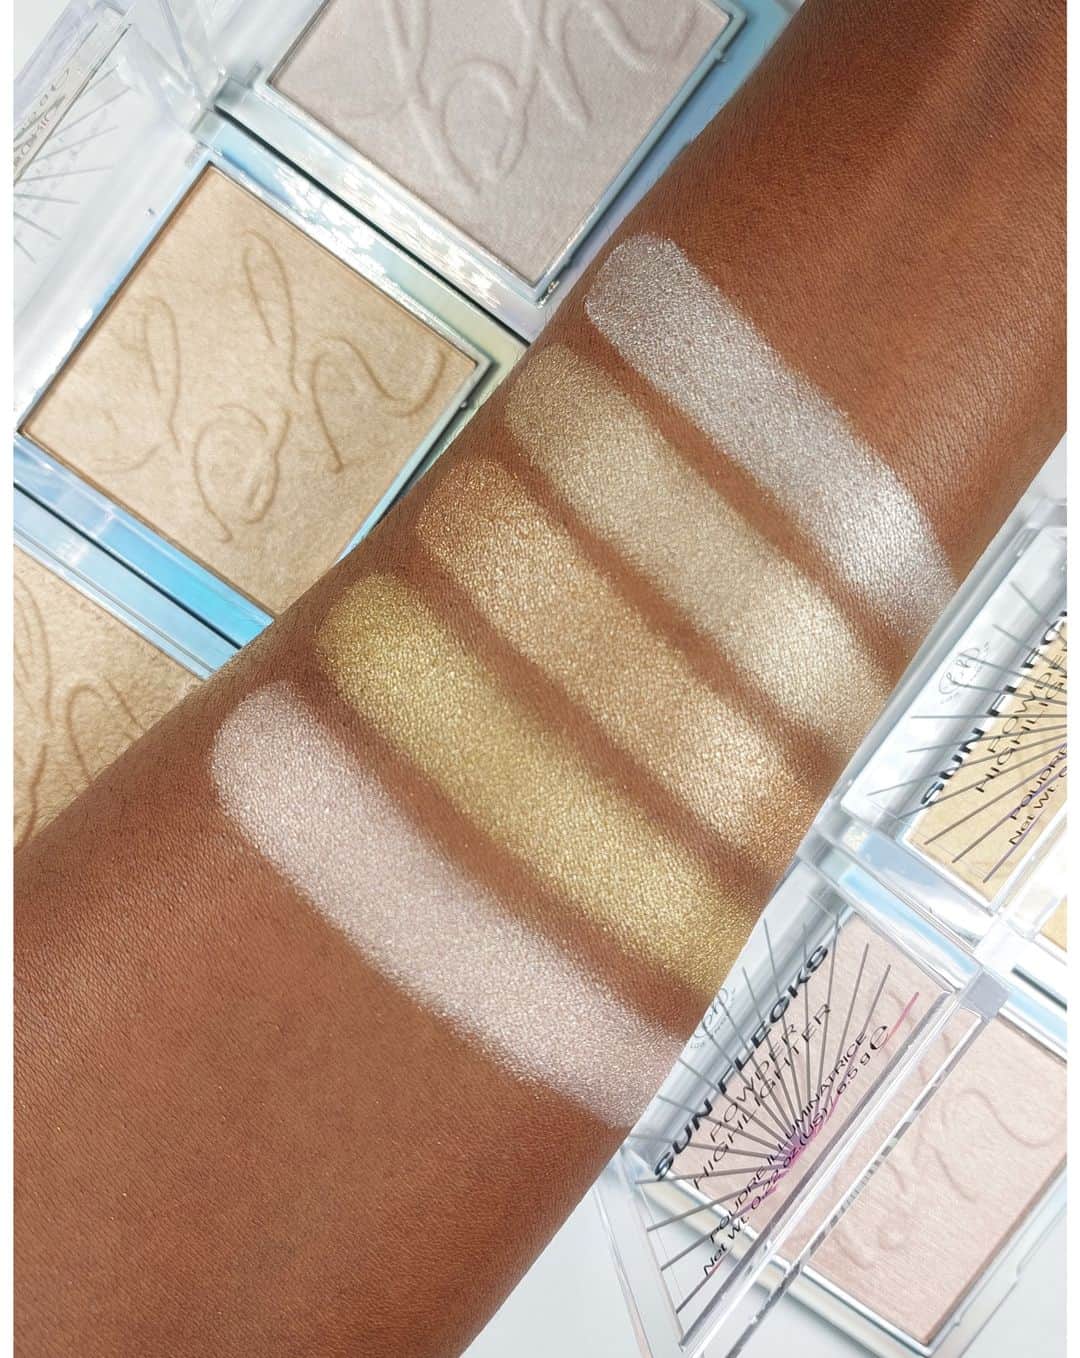 BH Cosmeticsのインスタグラム：「It's golden hour, every hour with our NEW Sun Flecks Powdered Highlighters! 🤩☀️ Lightweight, soft-focus, versatile pressed powder highlighters that keep you looking refreshed ＋ radiant all year round ✨ Swipe for swatches 👉⁣ ⁣ Available in 5 universally-flattering shades⁣ ☀️ Beverly Hills: Burnt champagne⁣ ☀️ Bel Air: Gleaming Incandescent Opal⁣ ☀️ Cali Summer: Soft golden bronze⁣ ☀️ Golden State: True Gold⁣ ☀️ Sun Chaser: Pearly pink with a hint of peach⁣ ⁣ #bhcosmetics」